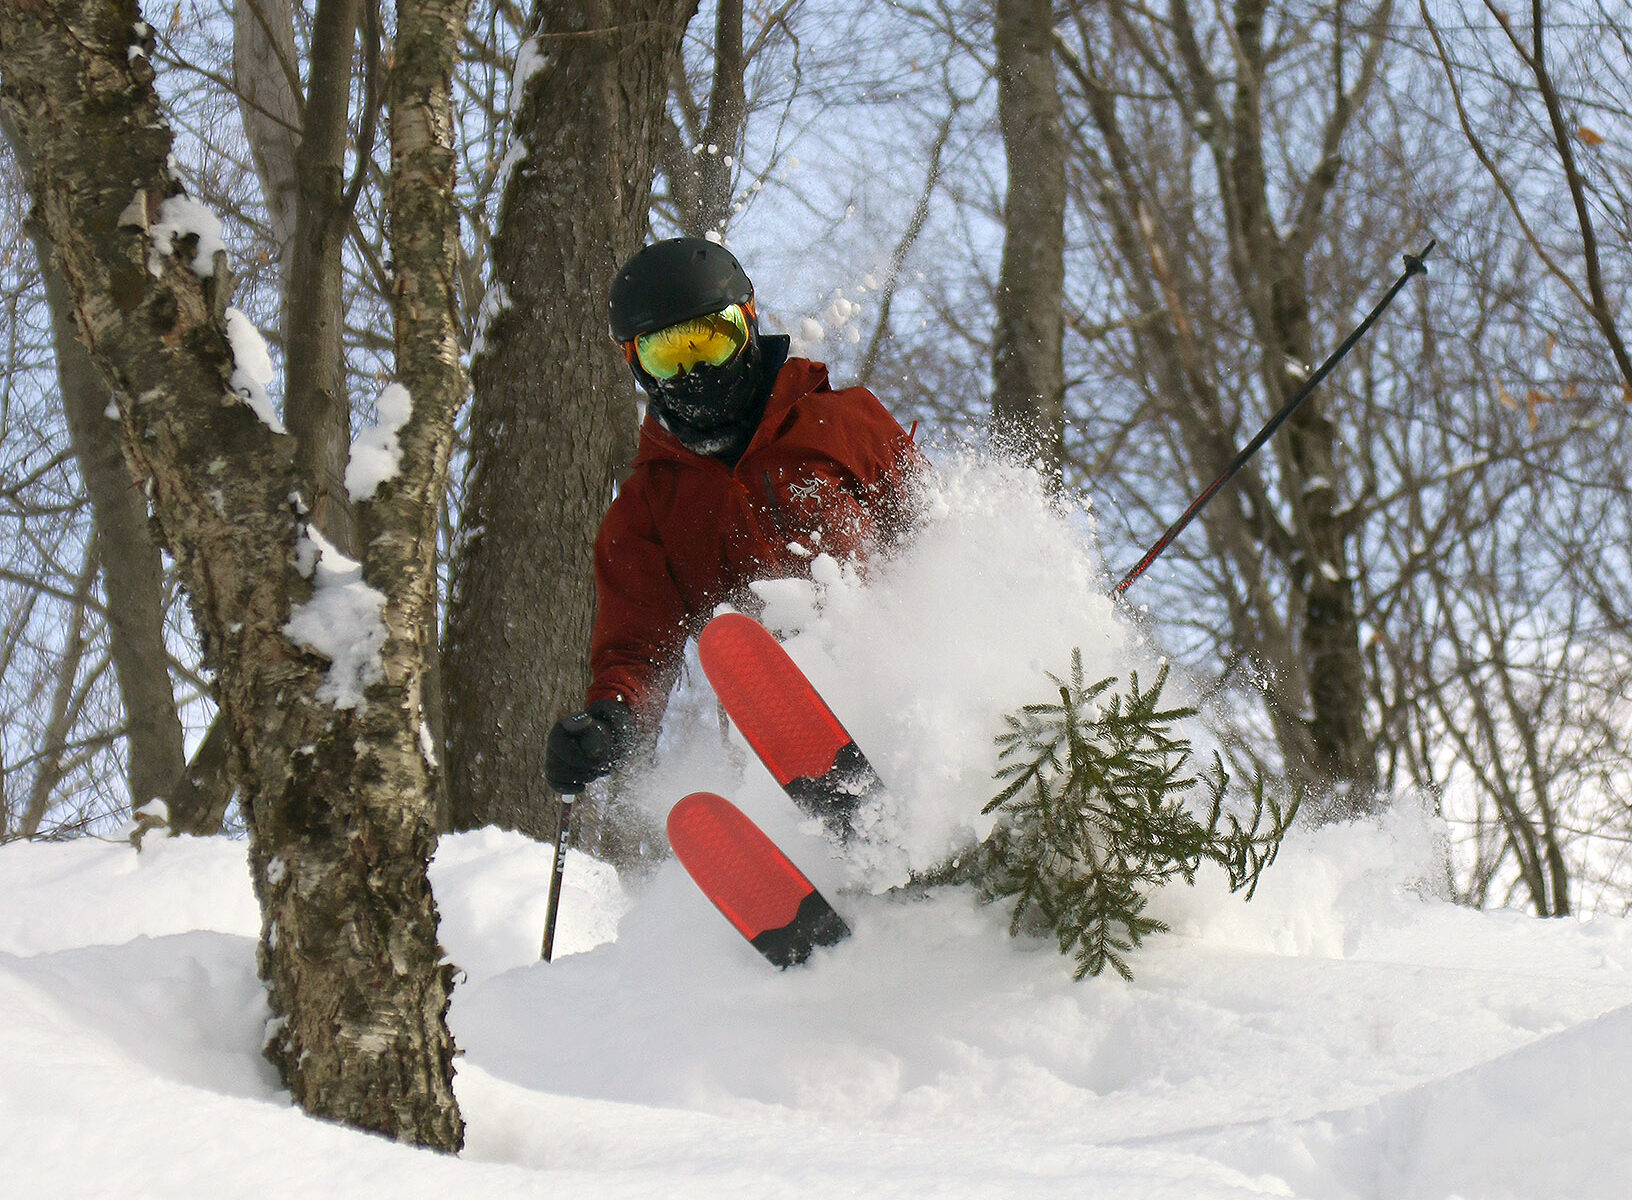 Dylan skiing powder by a small evergreen tree in the Doug's Solitude area of Bolton Valley Resort in Vermont